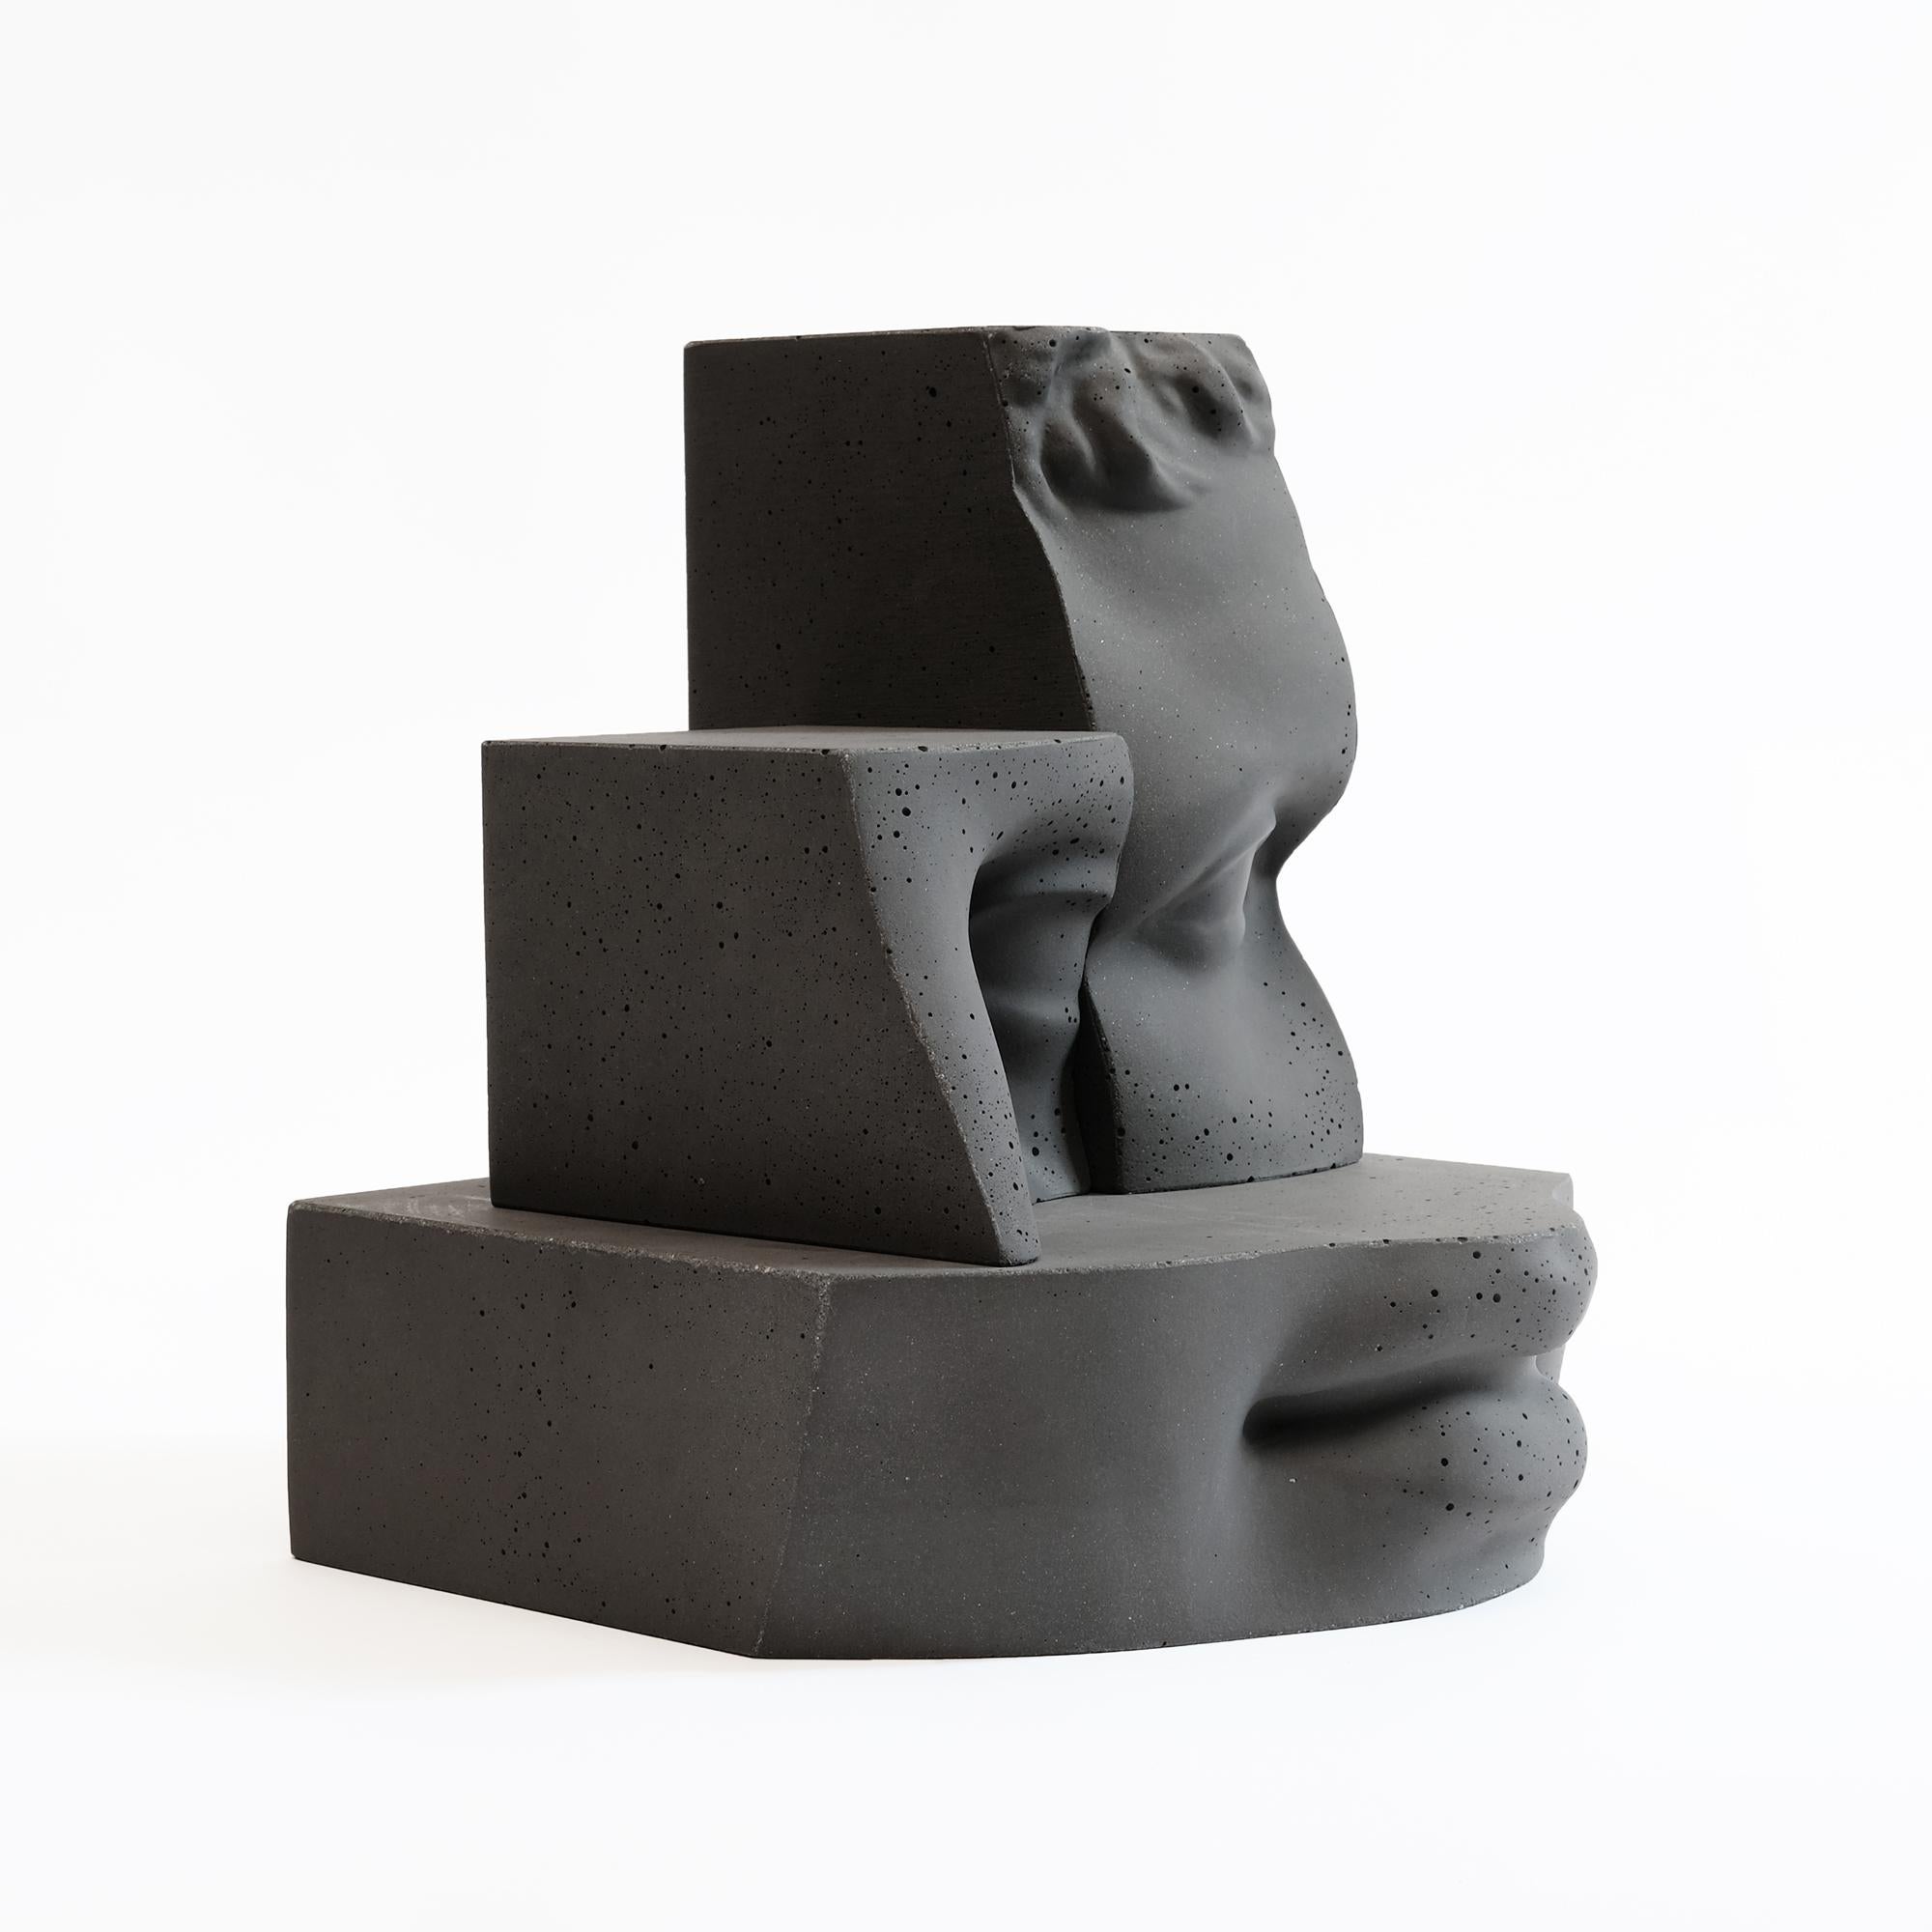 Contemporary Paolo Giordano Hermes abstract sculpture concrete cement cast grey

Hermes is concrete sculpture. It's part of a large work that is also photographic: 'Digital Journey into the Classic’, where the original classic is provocatively